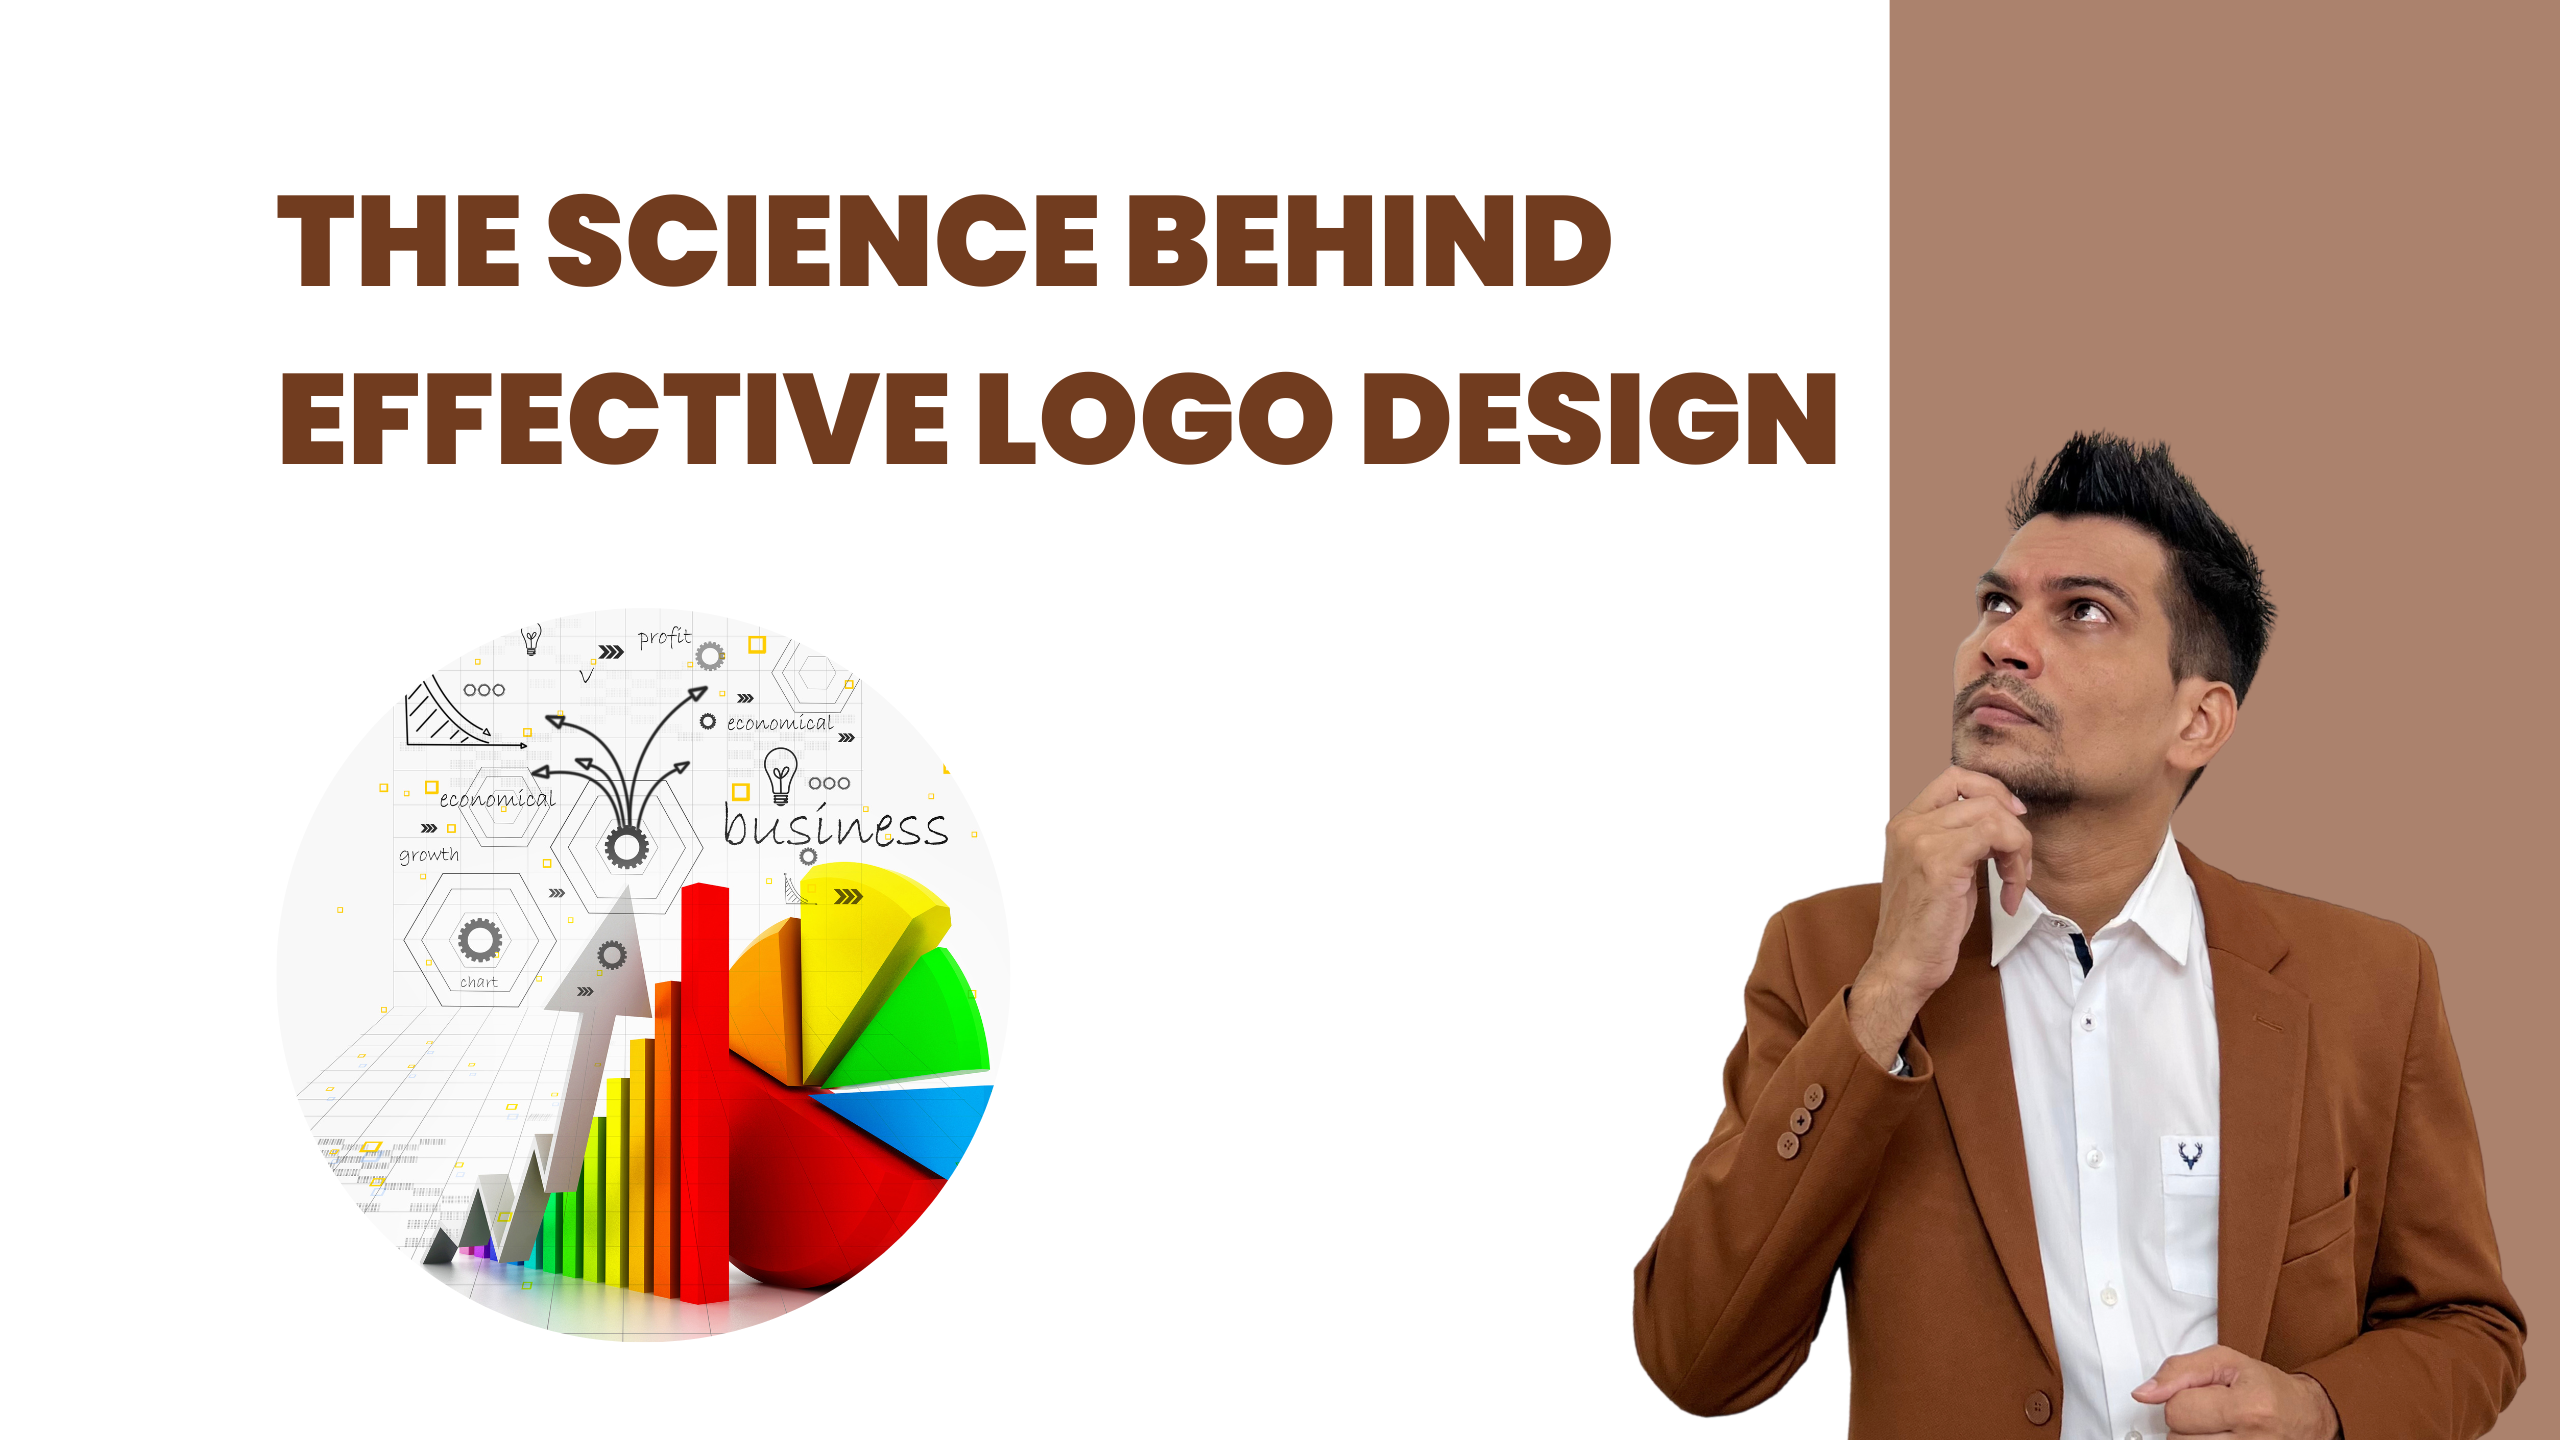 Science Behind Effective Logo, The Science Behind Effective Logo Design, Scientific Logo by Subhash